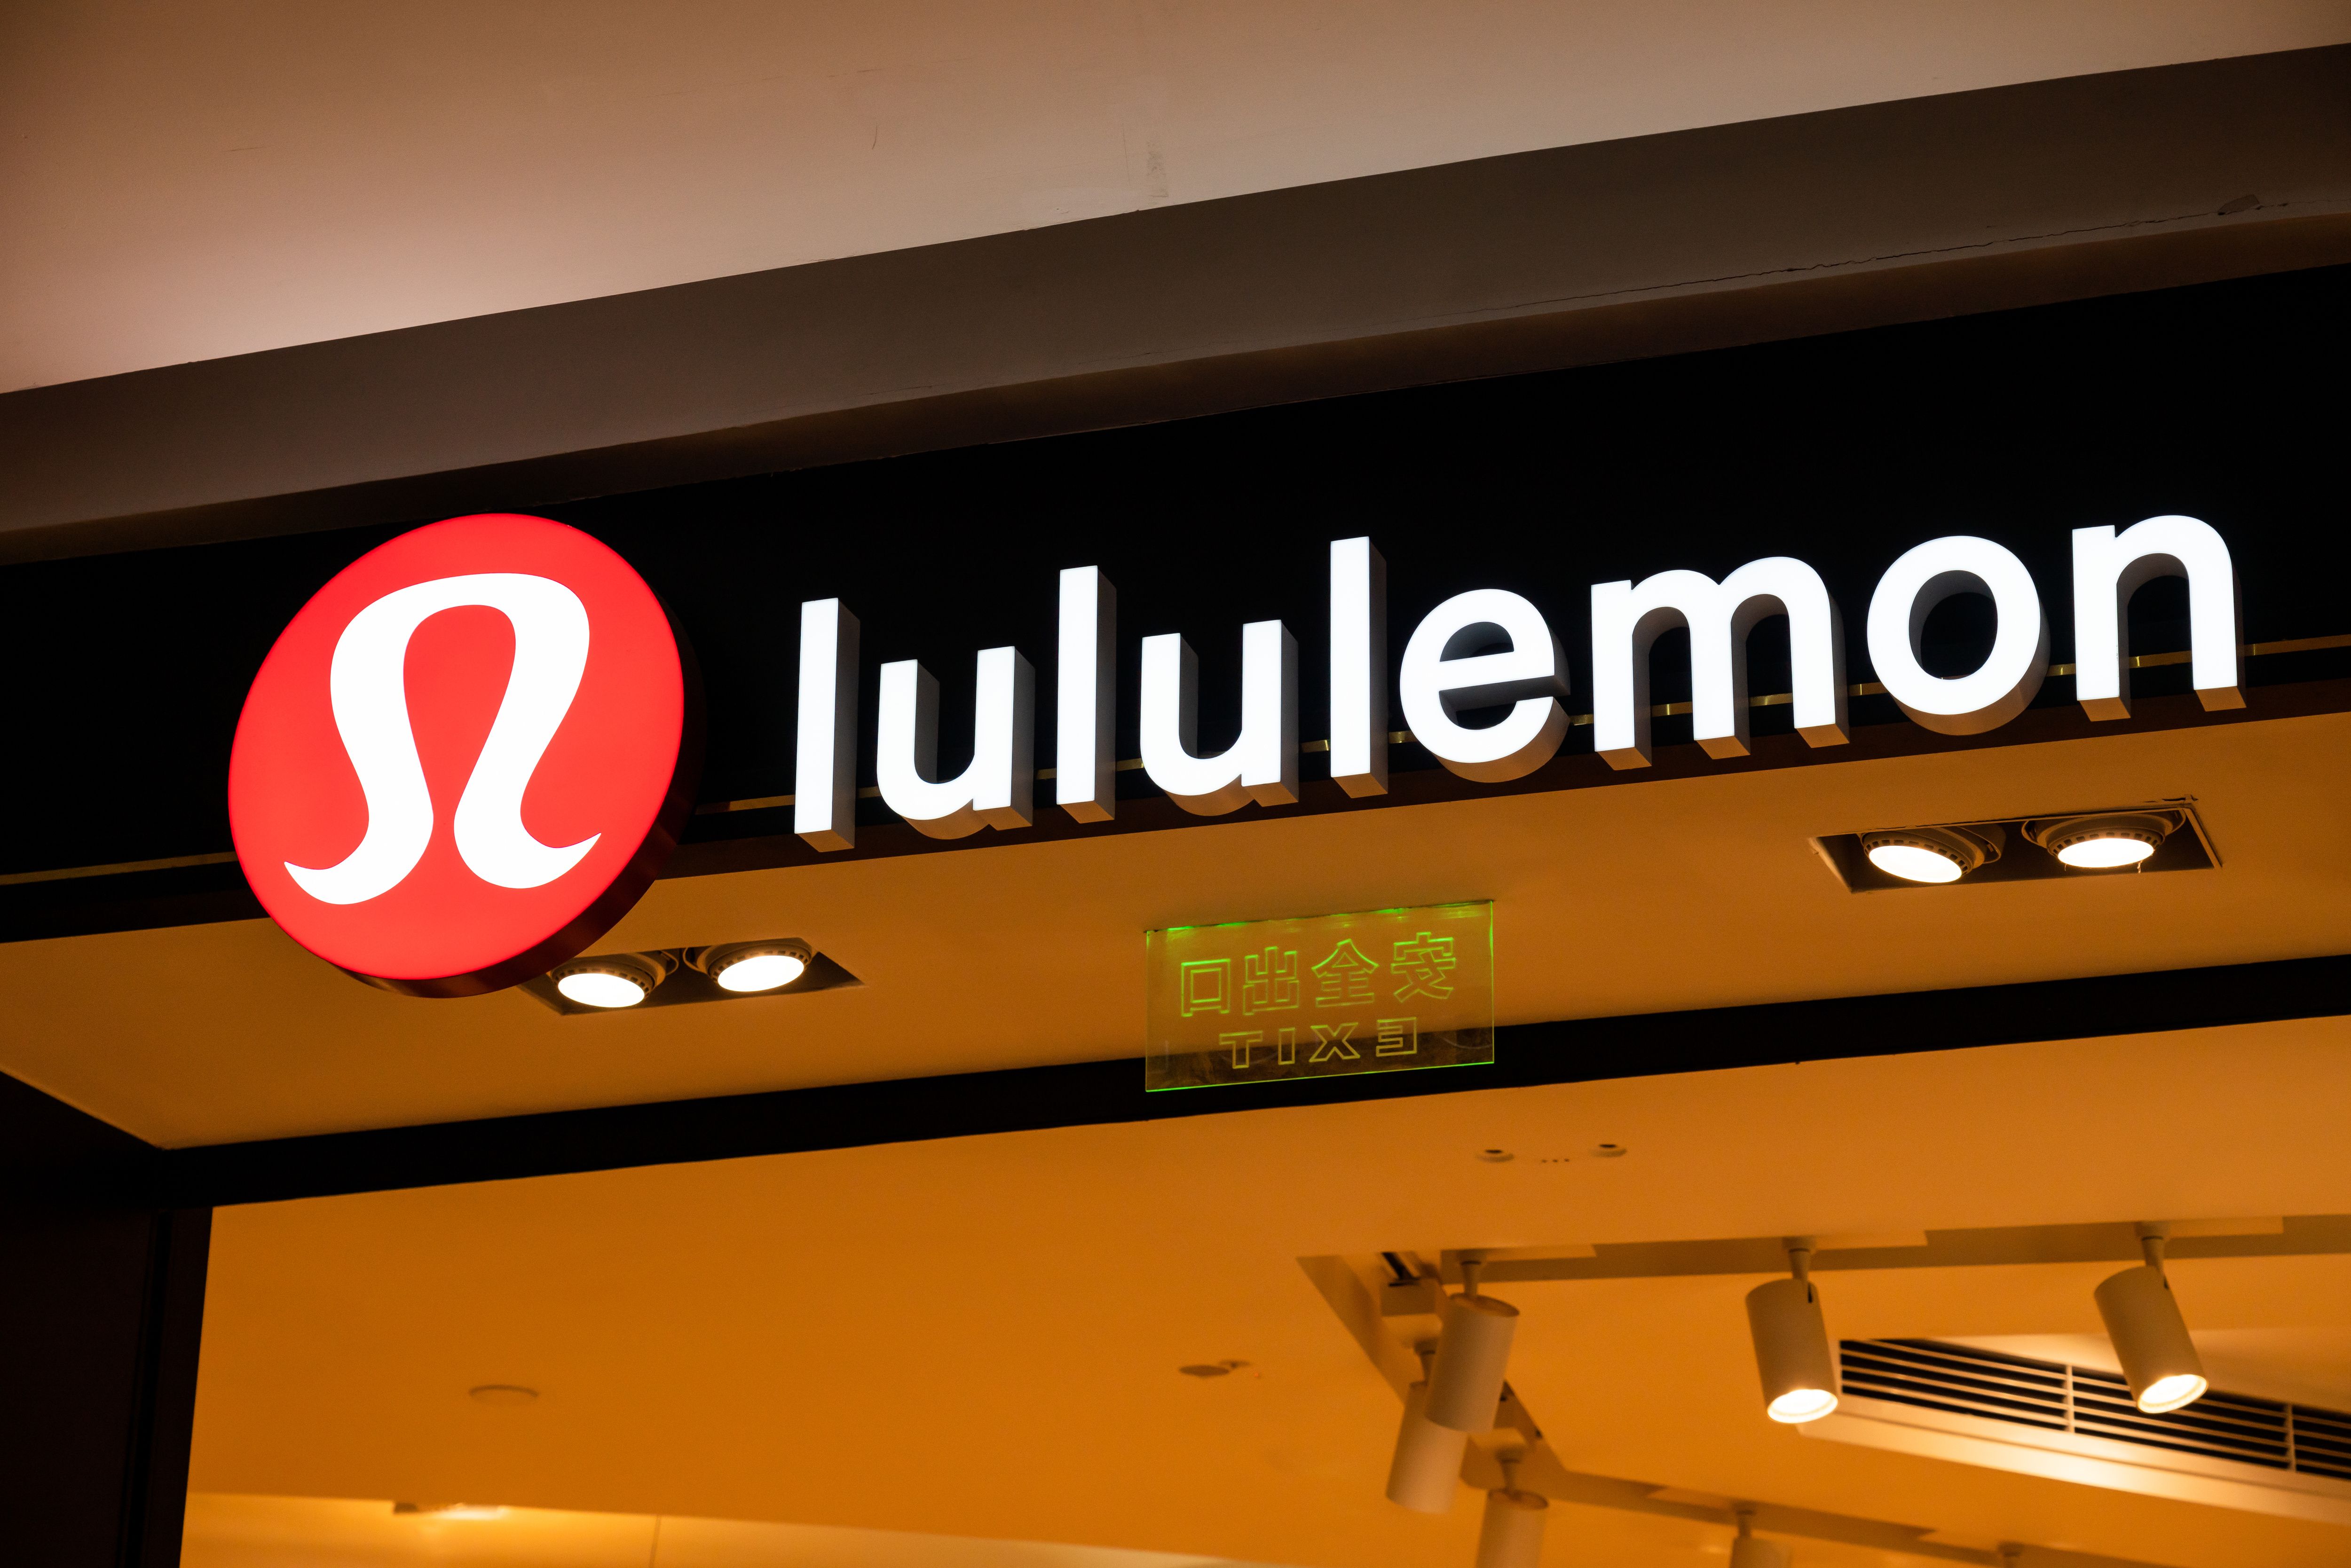 Where Did Lululemon Get Its Name